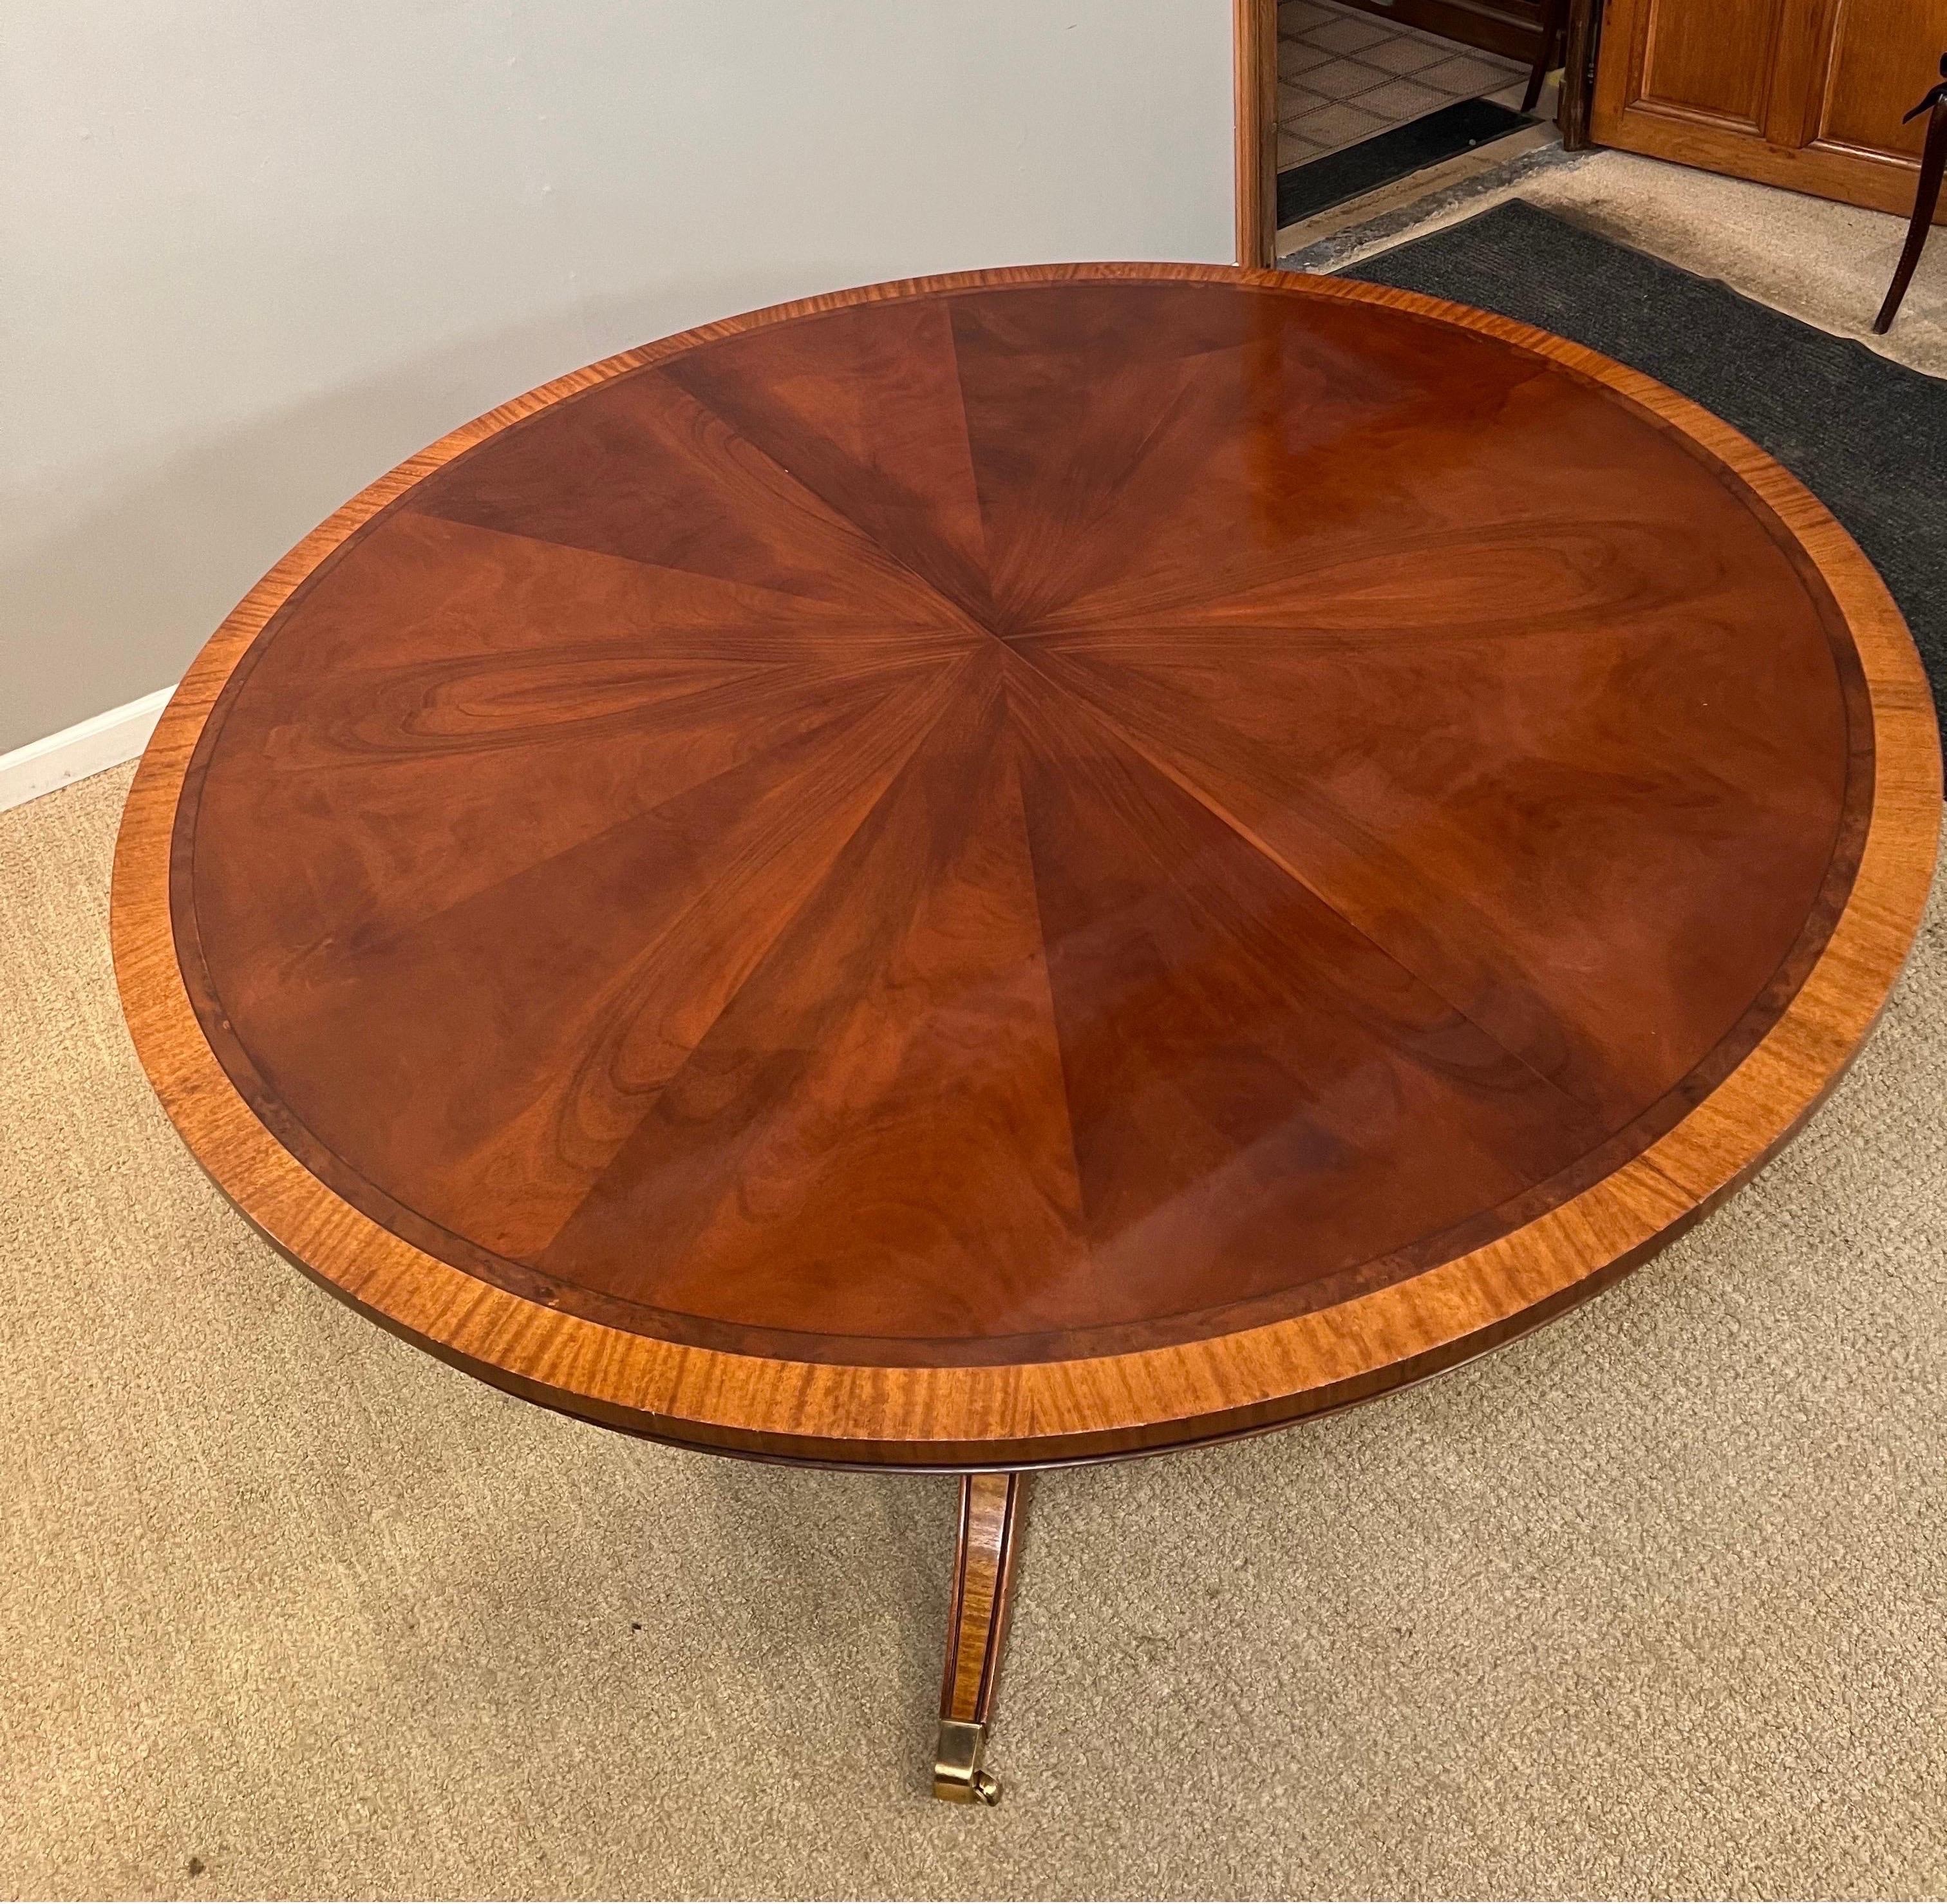 Late 20th Century Mahogany & Cross-Banded Single Pedestal Extension, Dining Table with Two Leaves